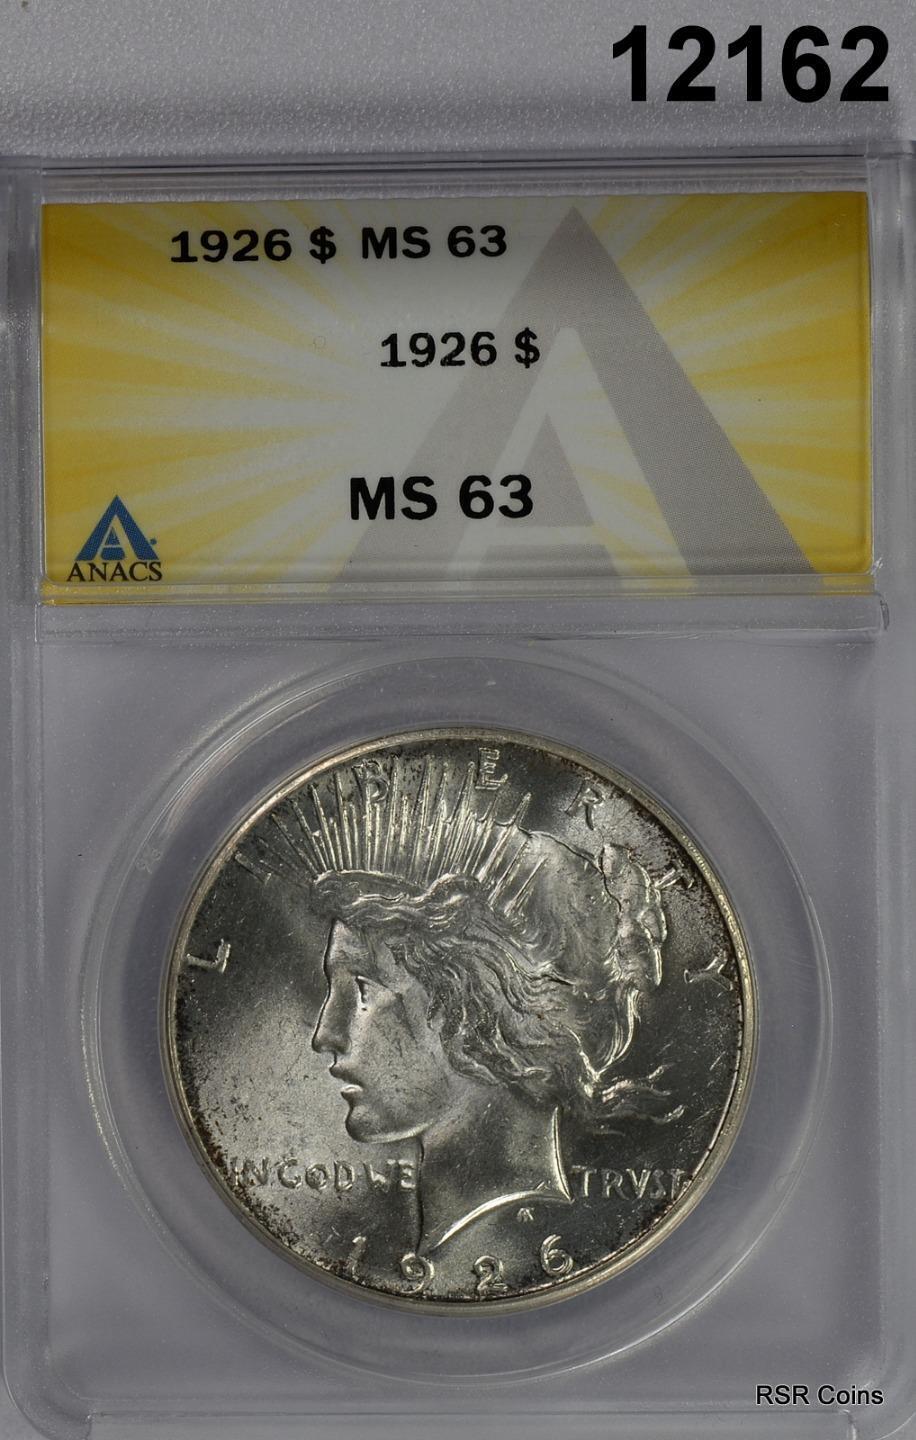 1926 PEACE SILVER DOLLAR ANACS CERTIFIED MS63 FLASHY! #12162